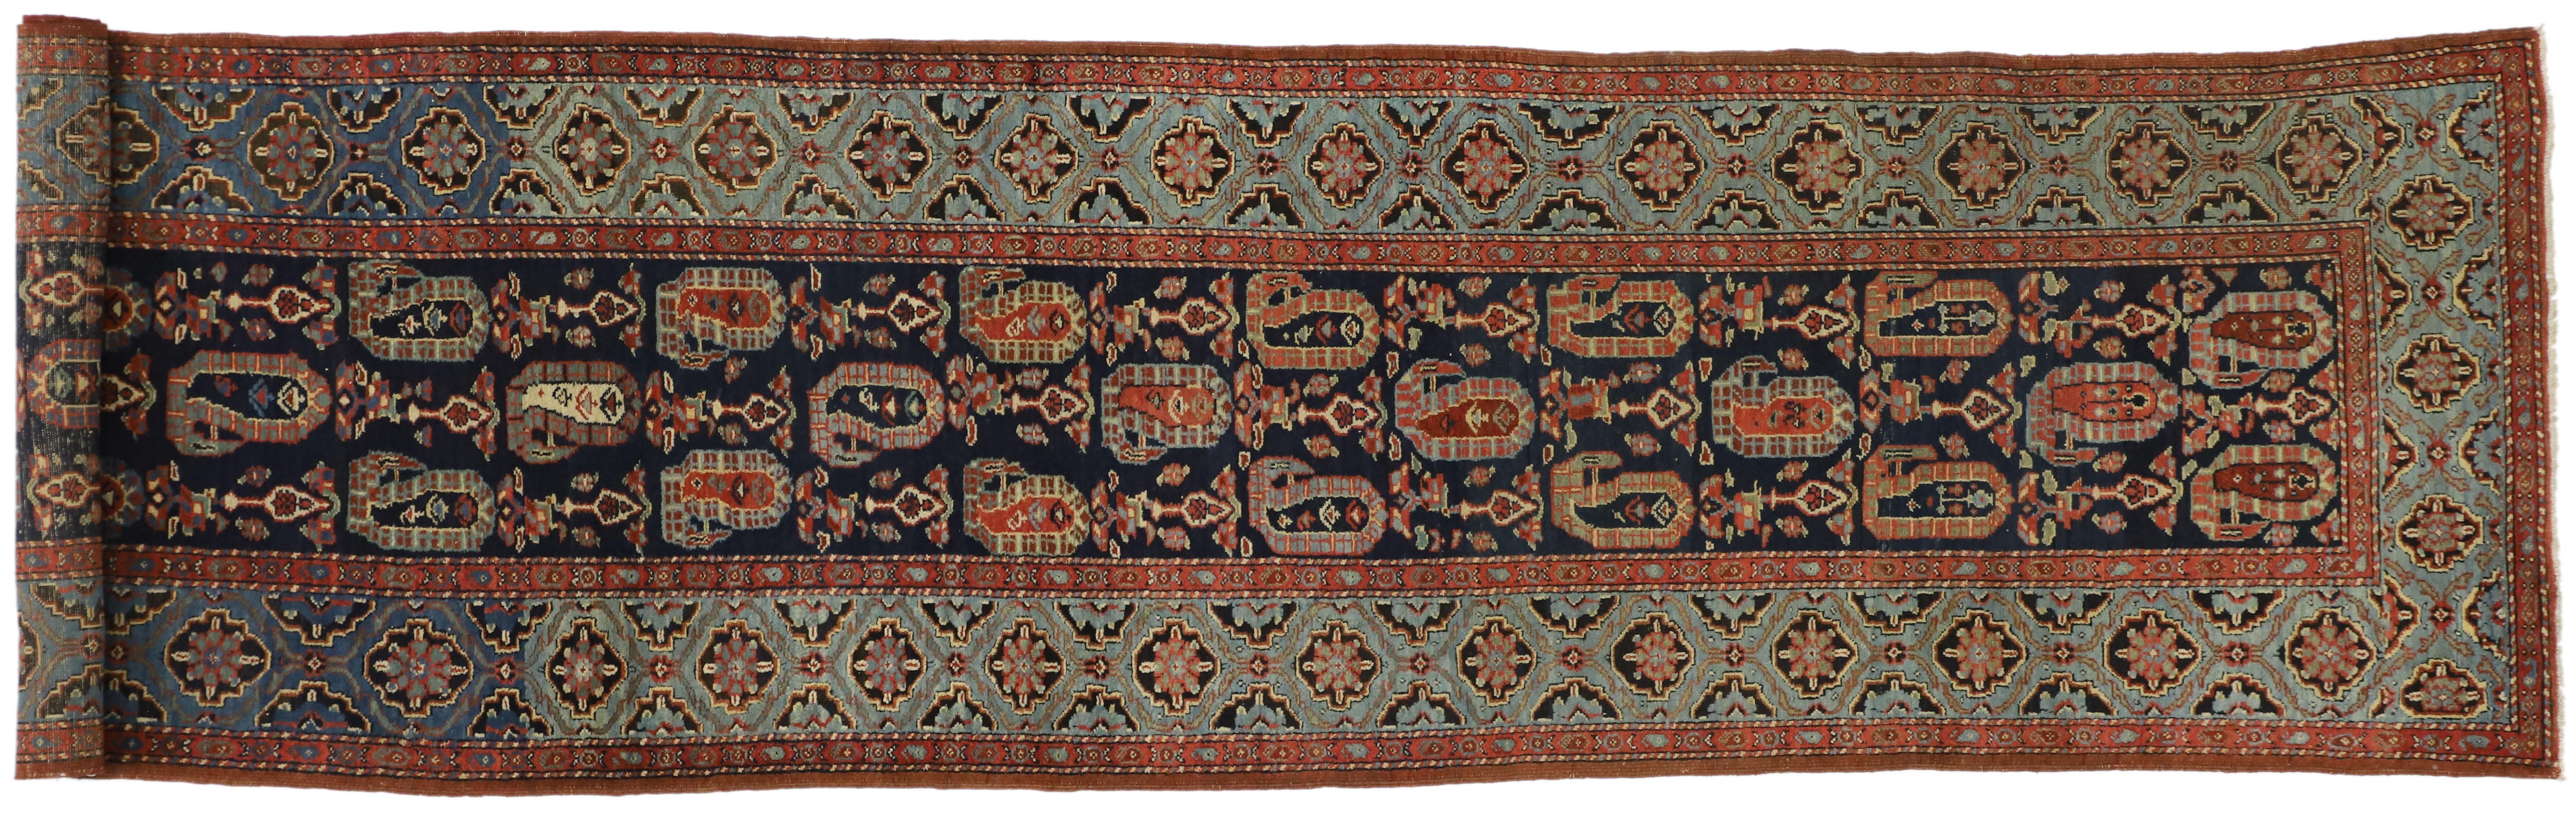 Antique Persian Malayer Hallway Runner with Modern Parisian Style For Sale 3